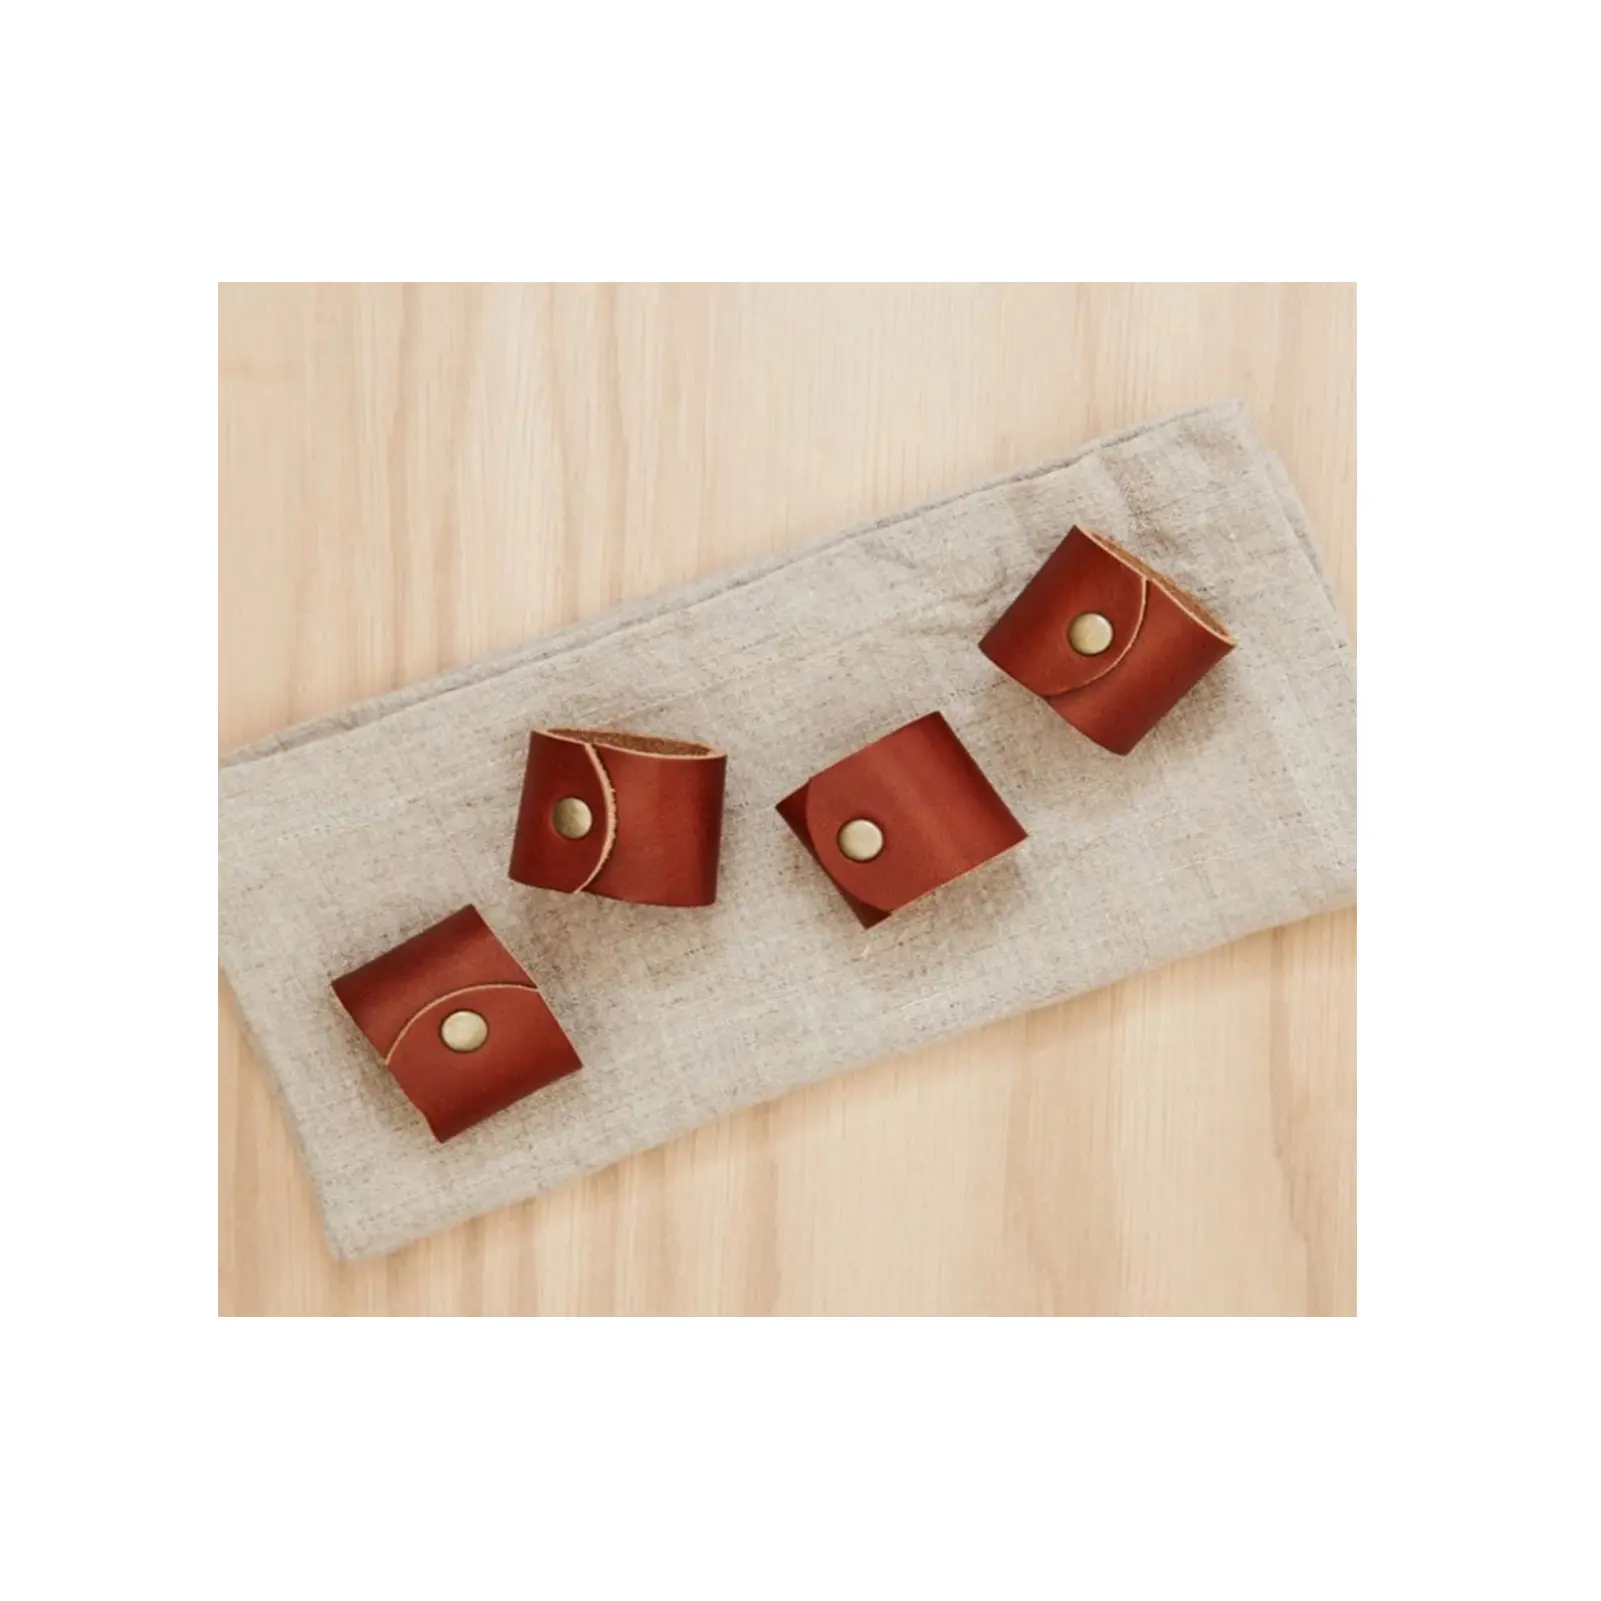 wedding napkin ring Minimalist Leather Napkin Rings Napkin Holders Paper Towel Rings for a Simple Table